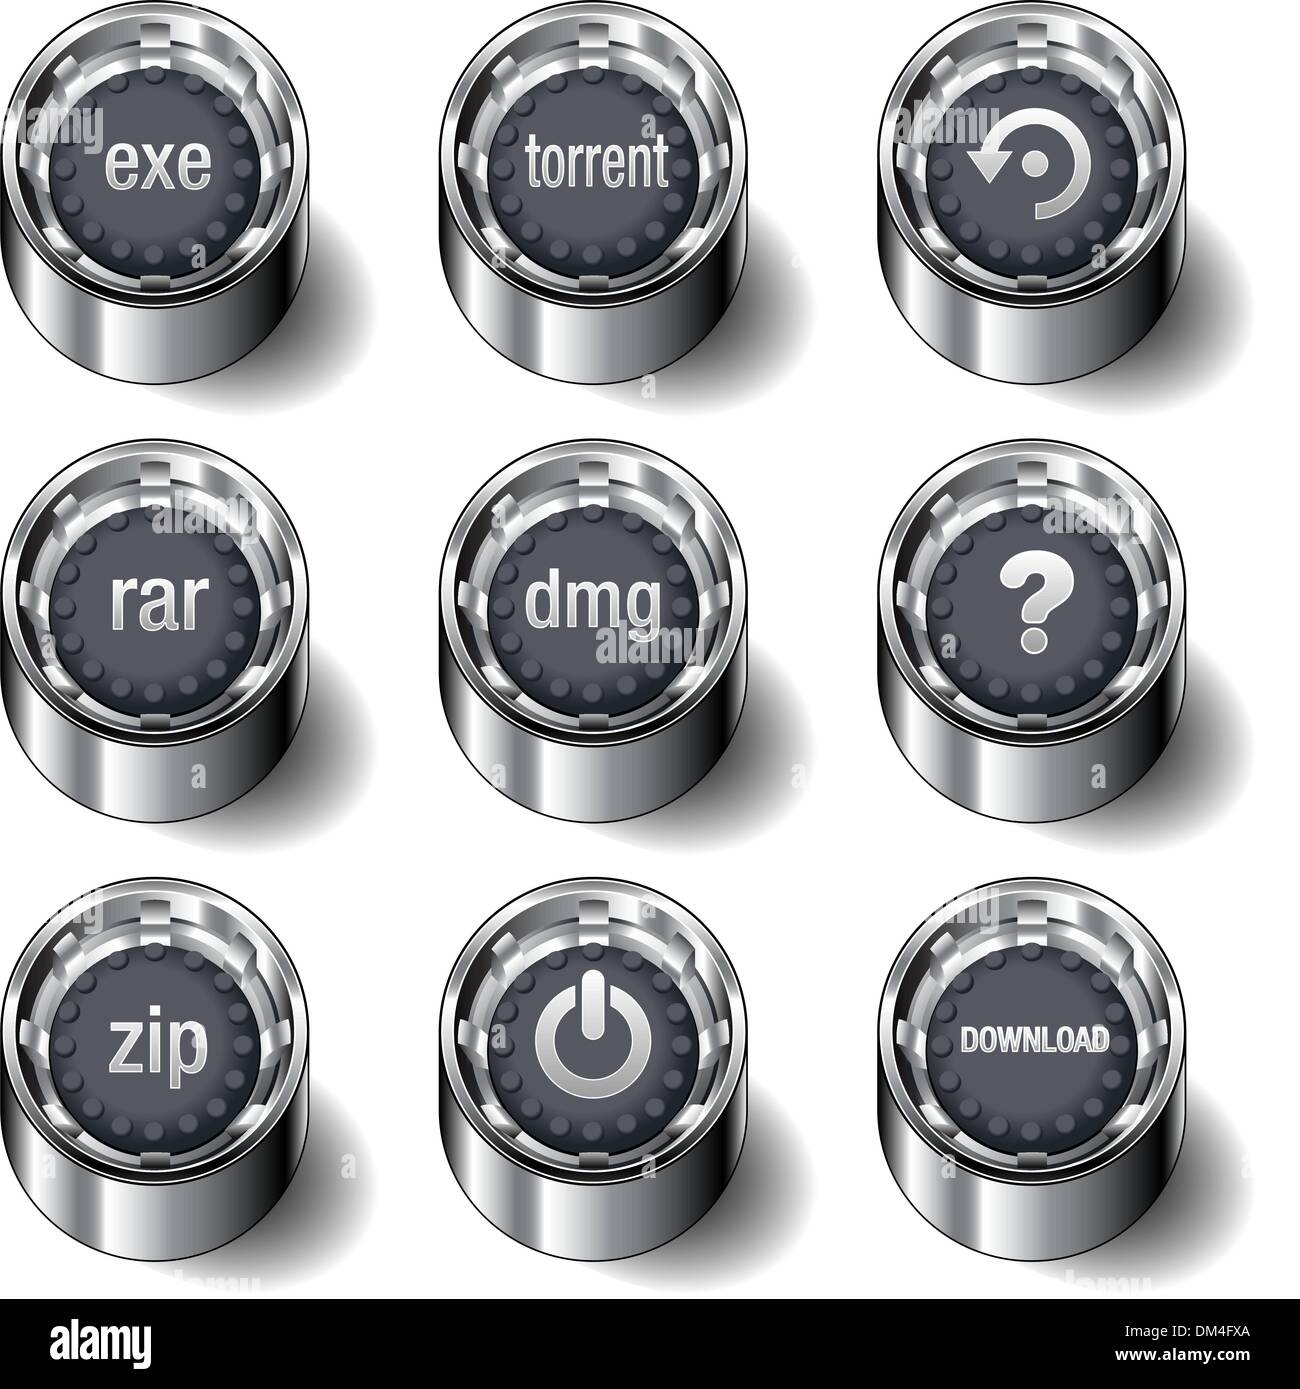 Internet download icons on rubber vector buttons Stock Vector